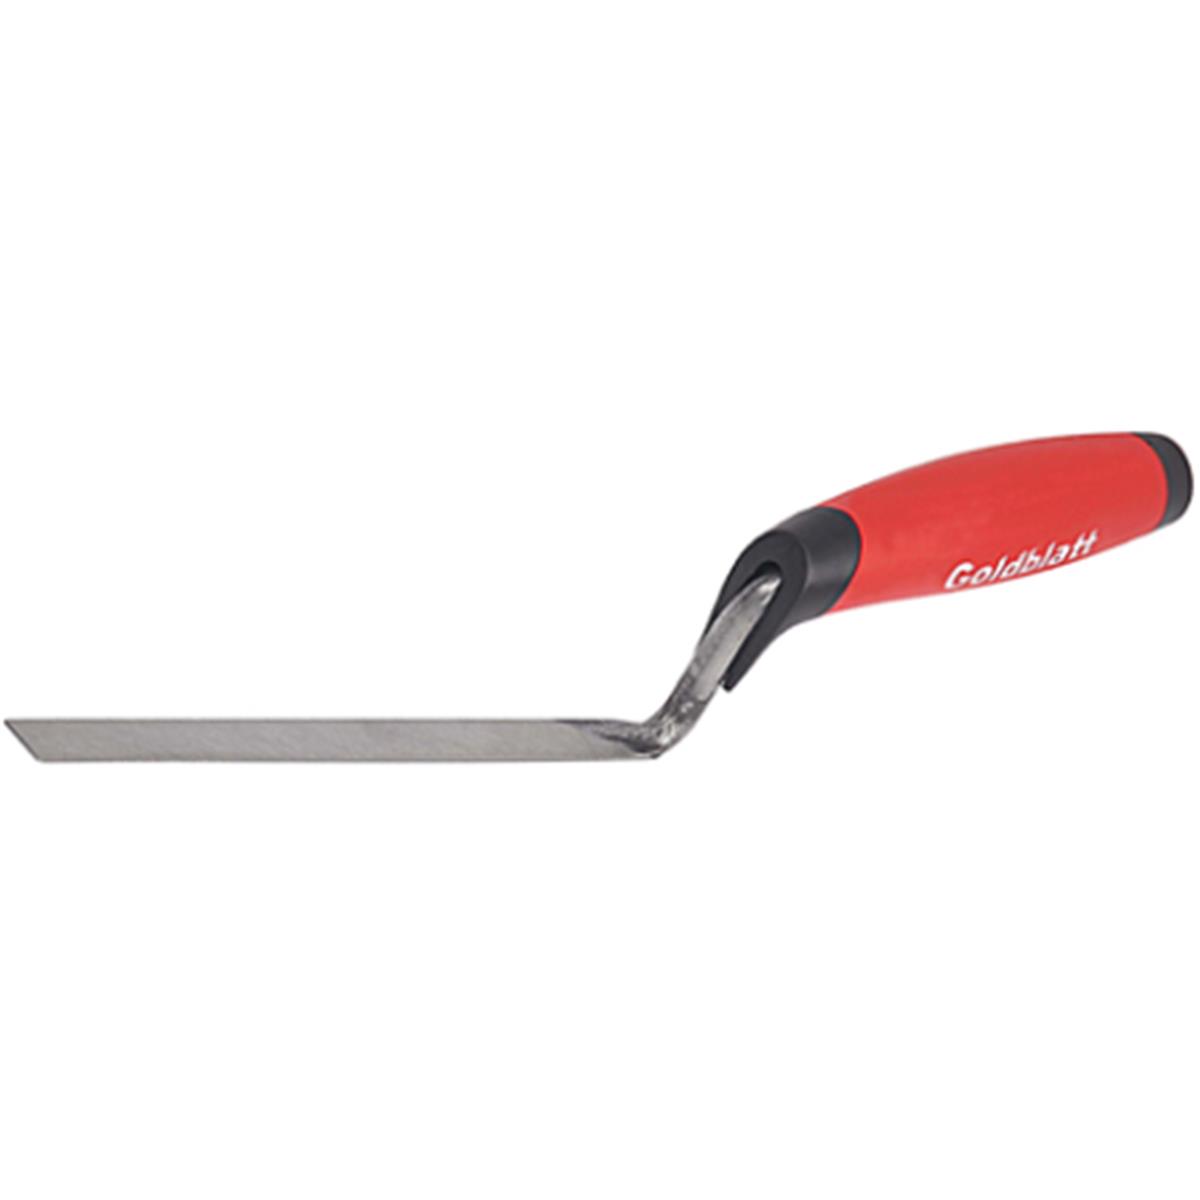 G01685 0.62 In. Tuckpointing Trowel Pro-grip Handle